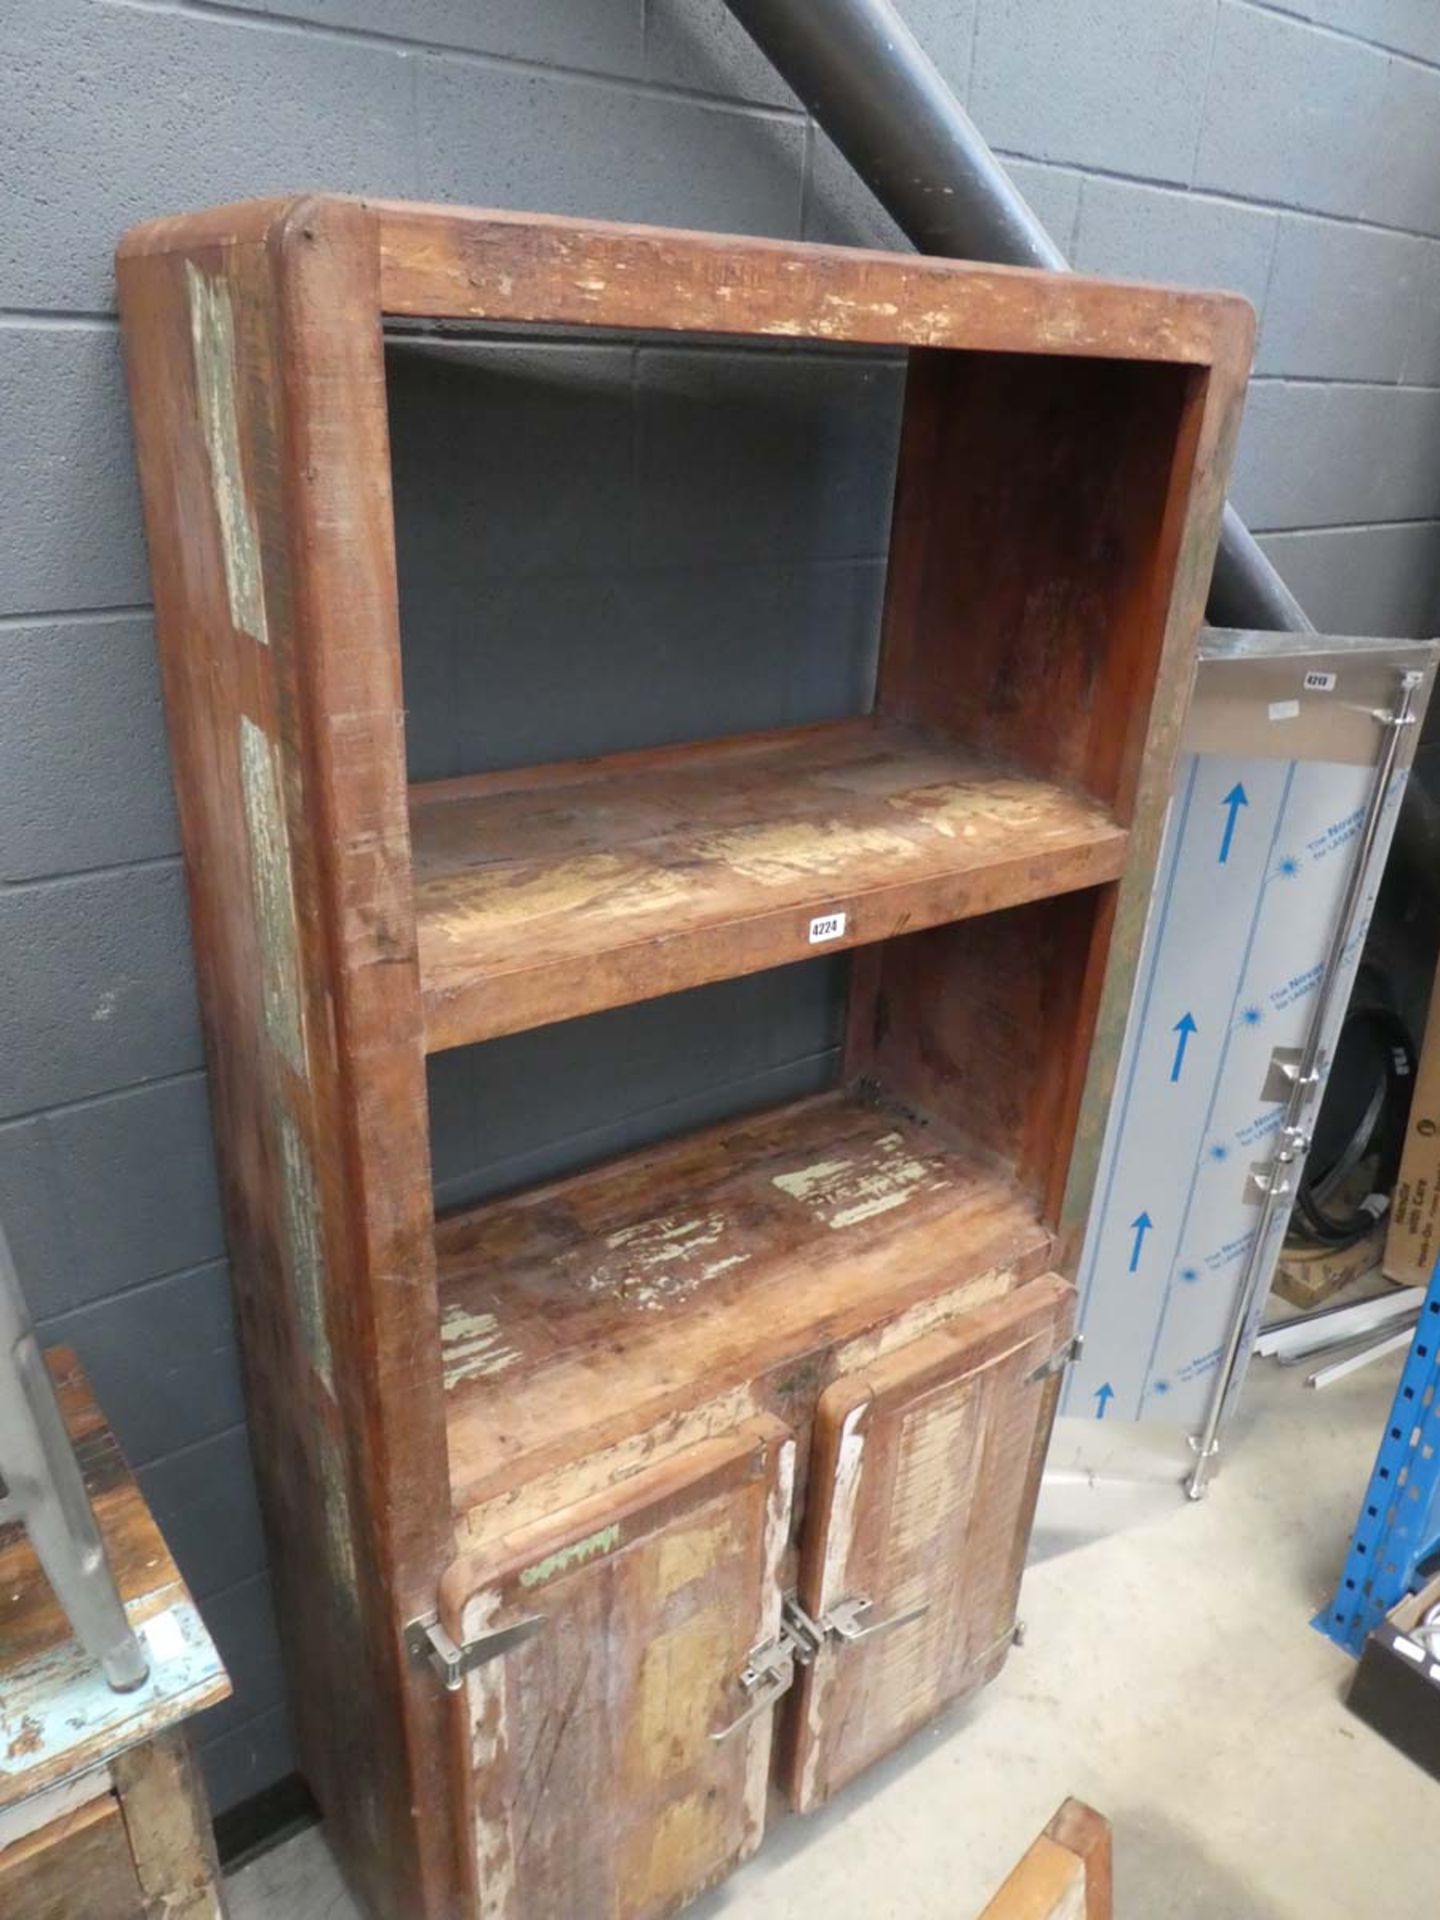 6ft Rustic Mexican Style display unit with 2 doors under